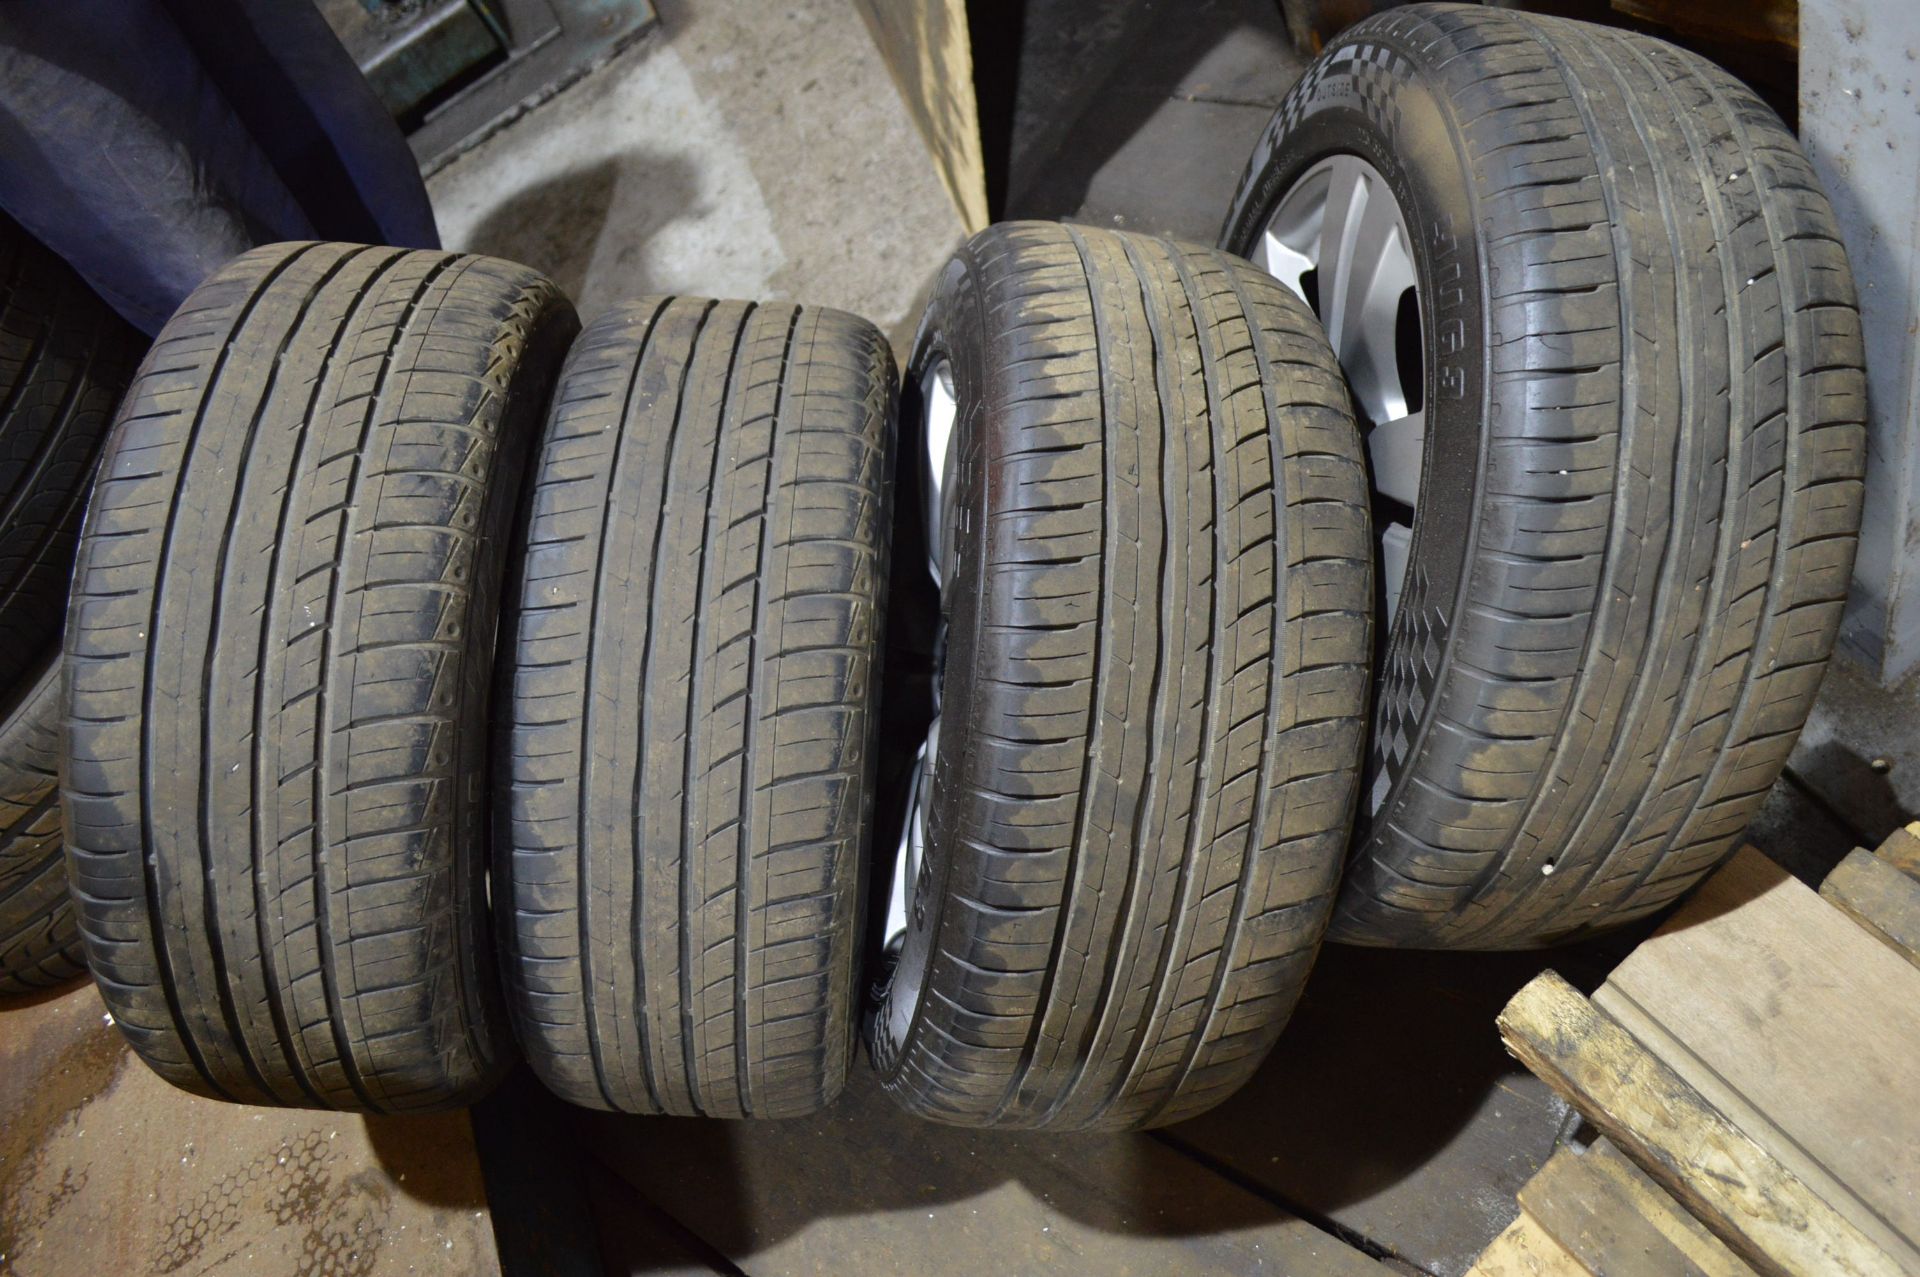 16" MERCEDES-BENZ ALLOY WHEELS - REMOVED FROM 2012 MERCEDES E CLASS *NO VAT* - Image 6 of 6